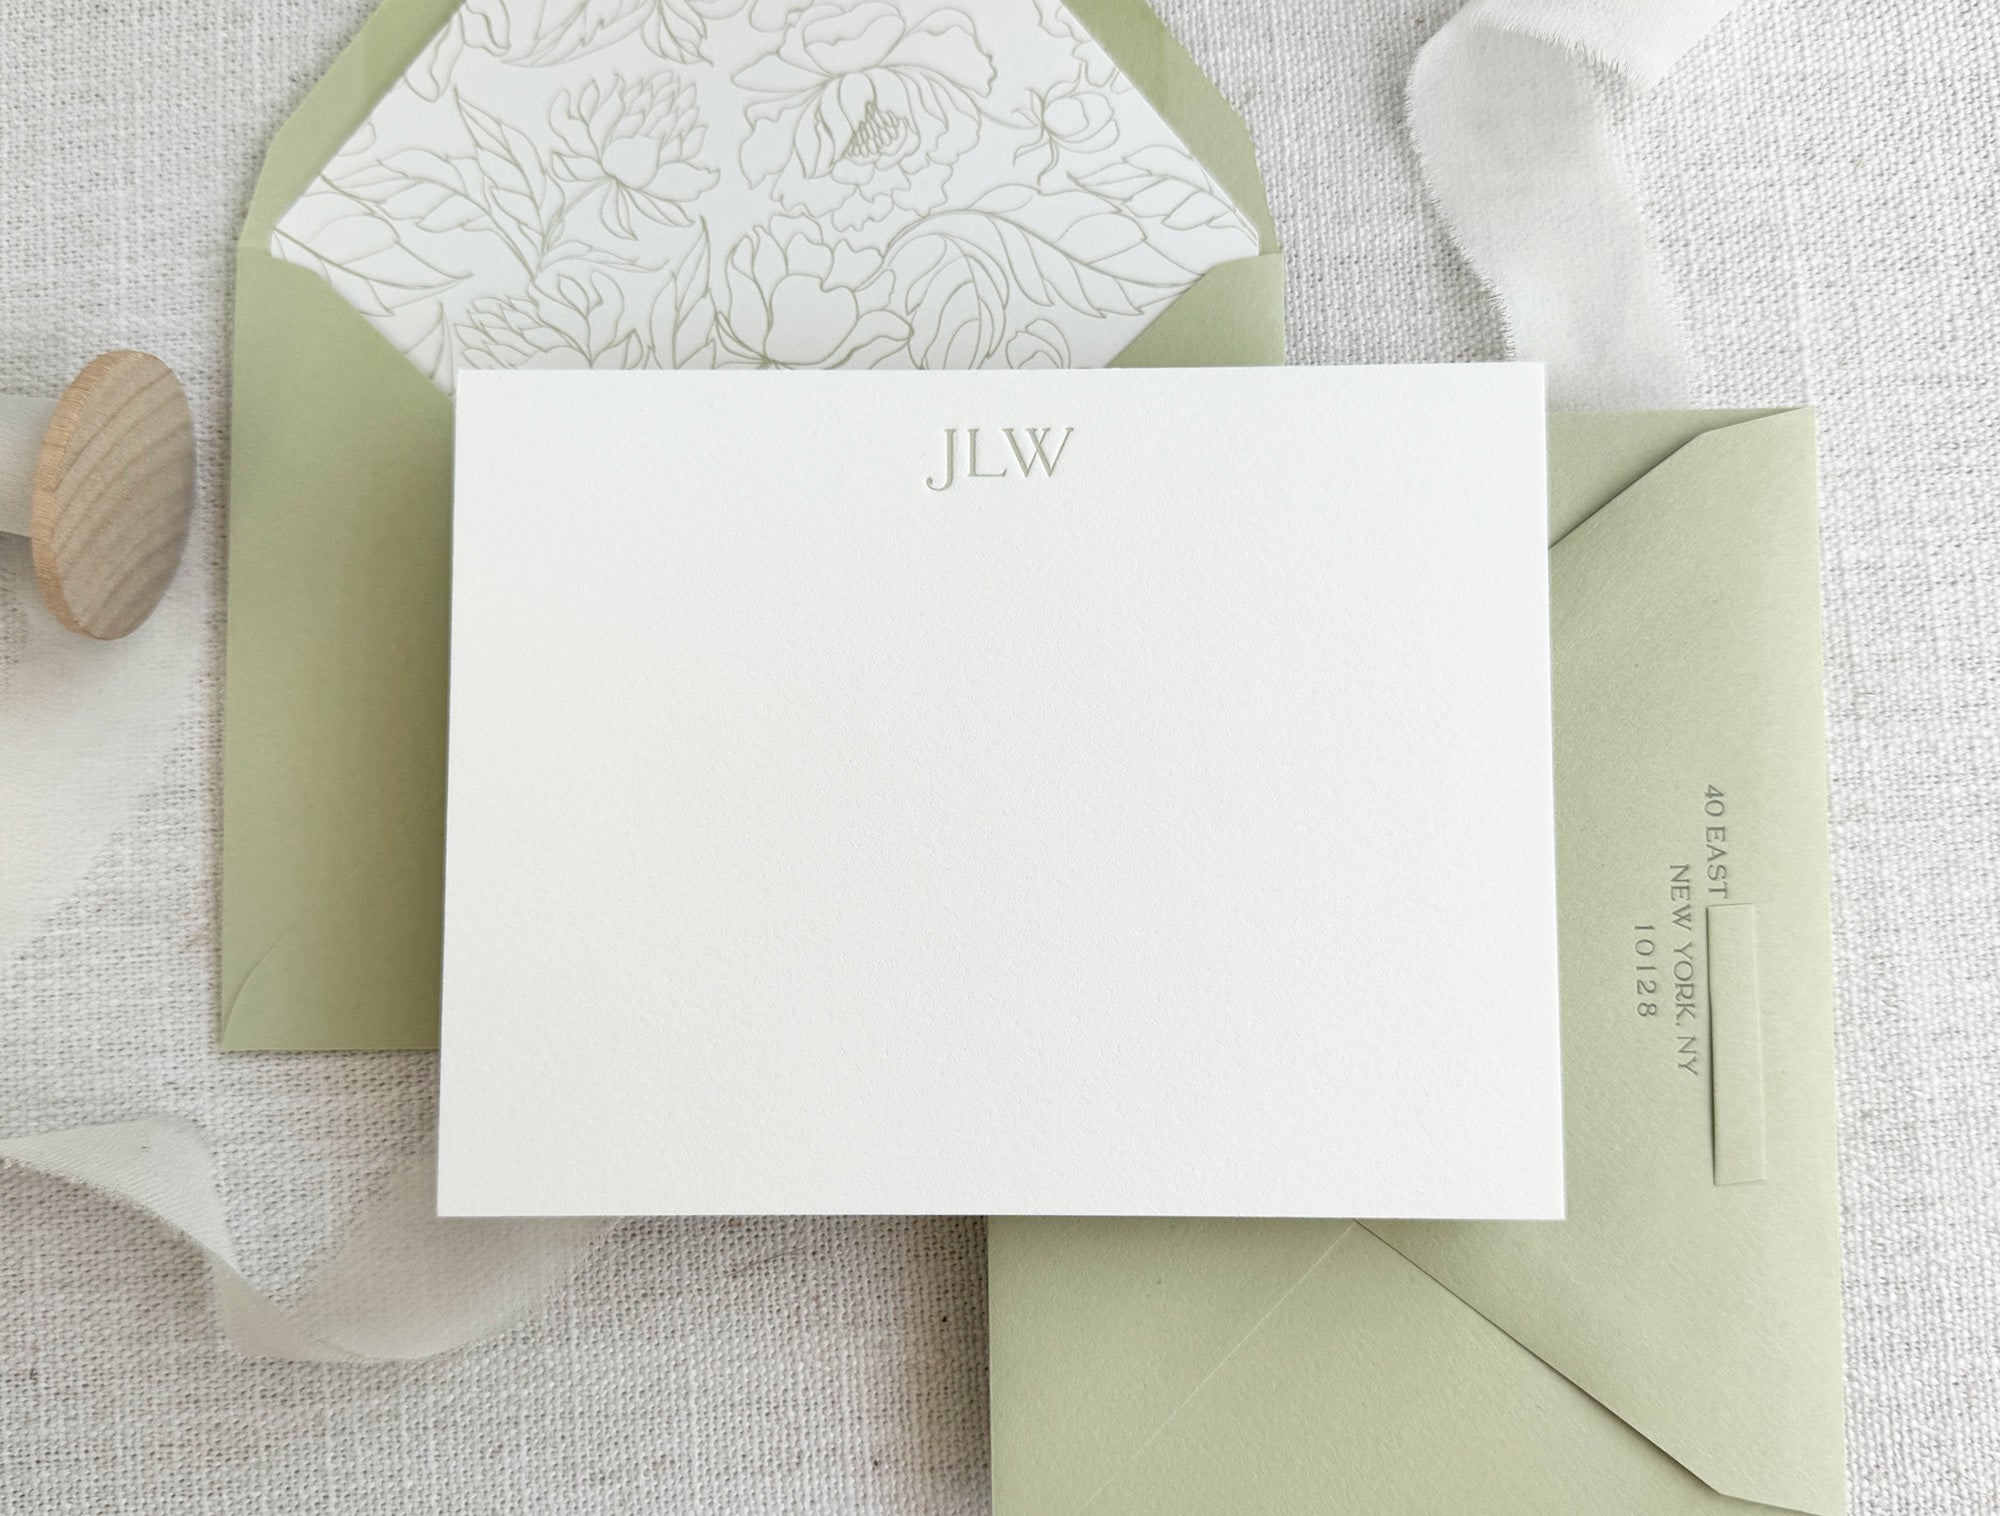 What makes letterpress stationery cards so special?